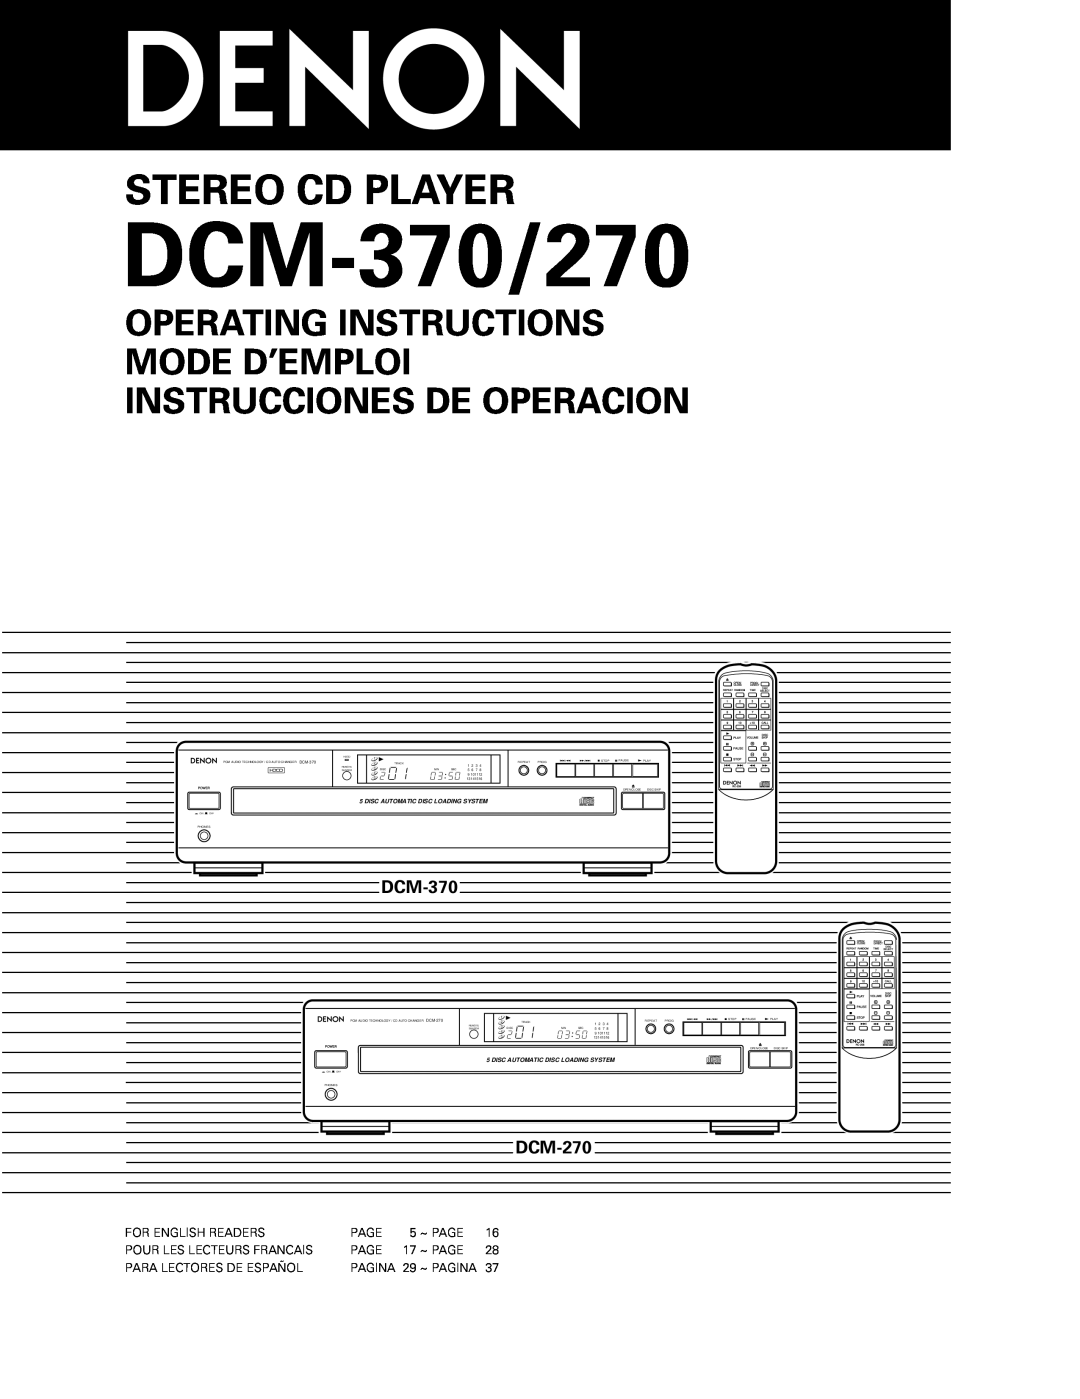 Denon operating instructions DCM-370/270, Stereo Cd Player, DCM-270, ‚‹ ﬁ‚, Disc Automatic Disc Loading System 